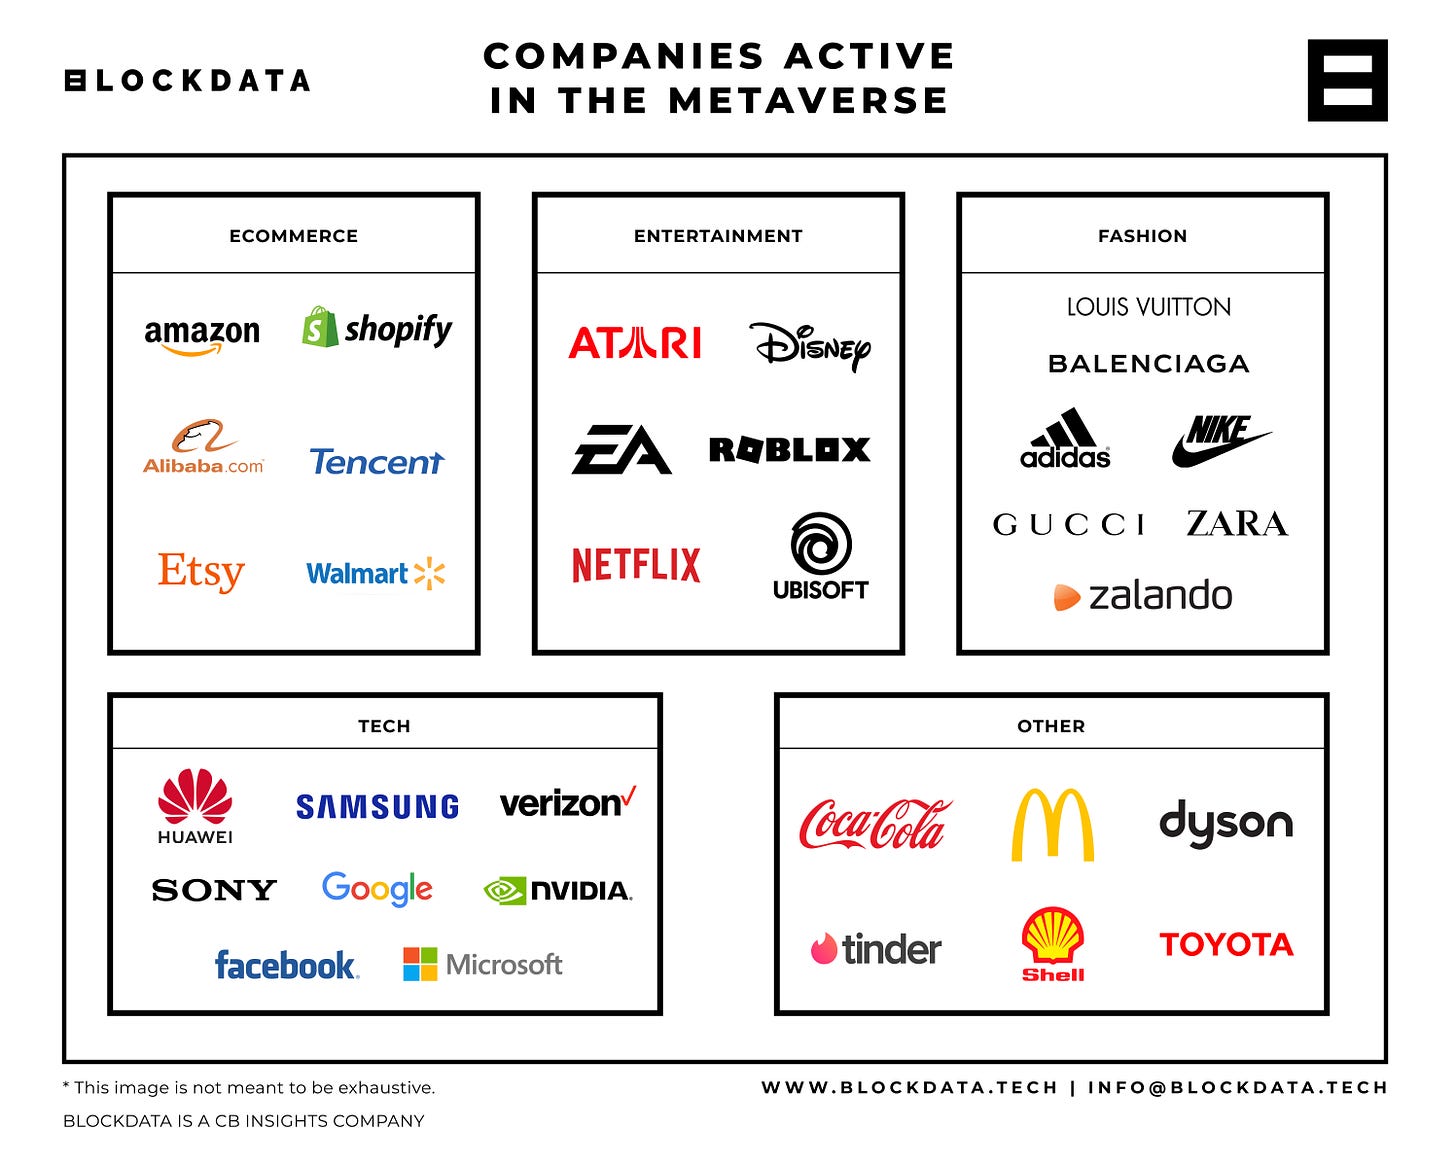 Companies active in the metaverse